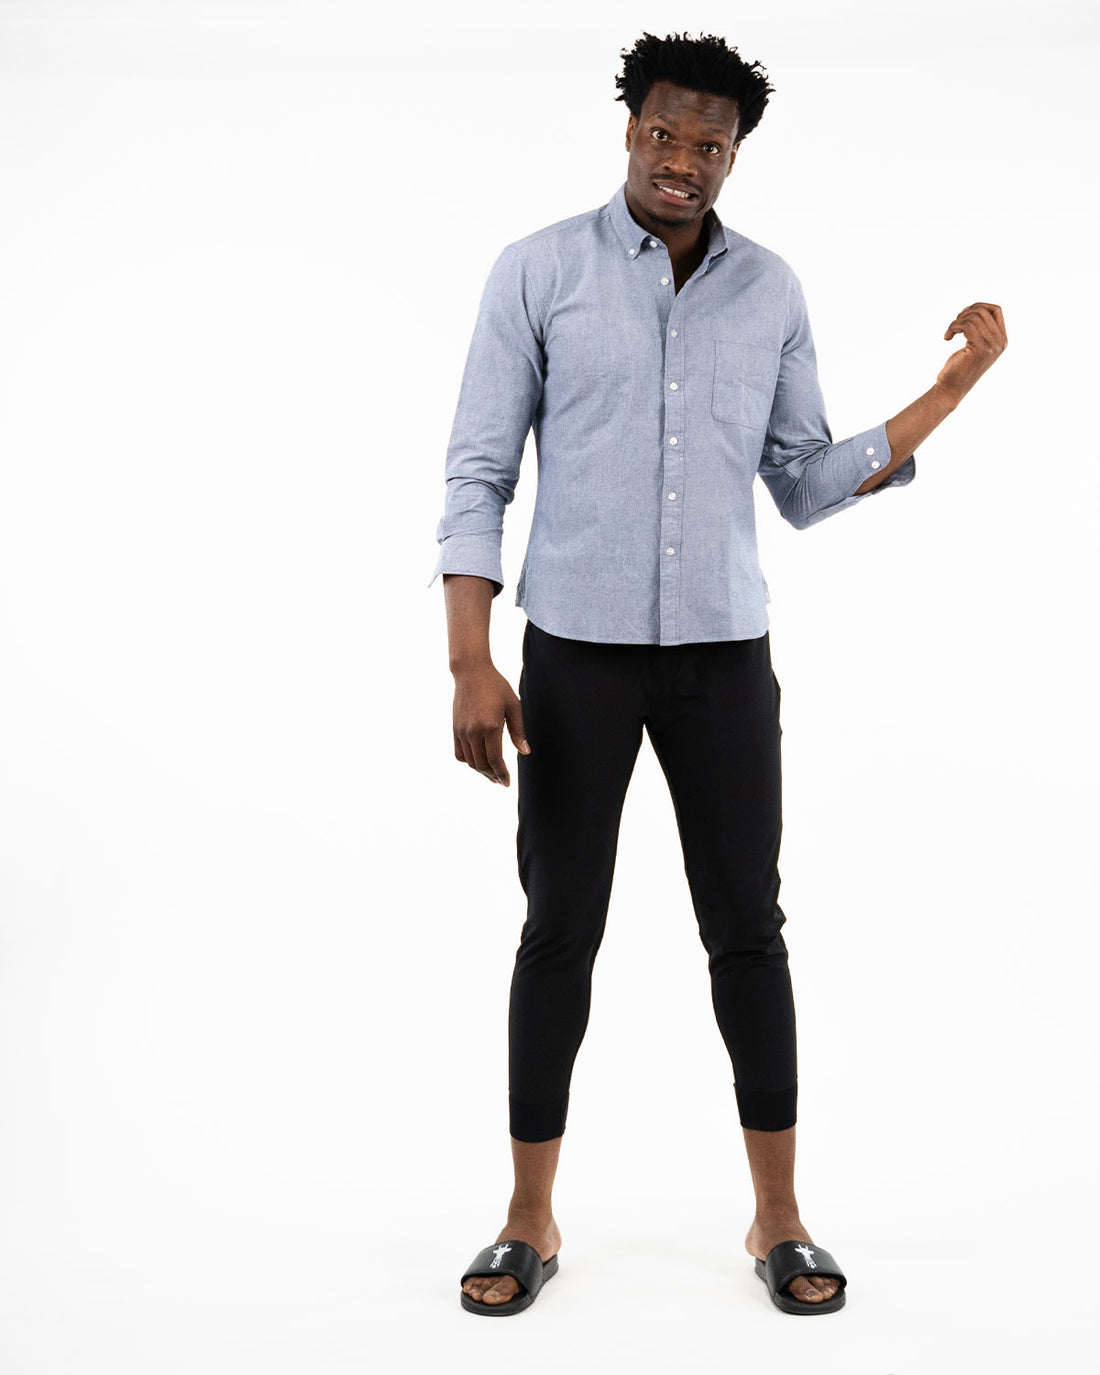 The Best Clothing Brands for Tall Guys (From Someone Who is 6'3)